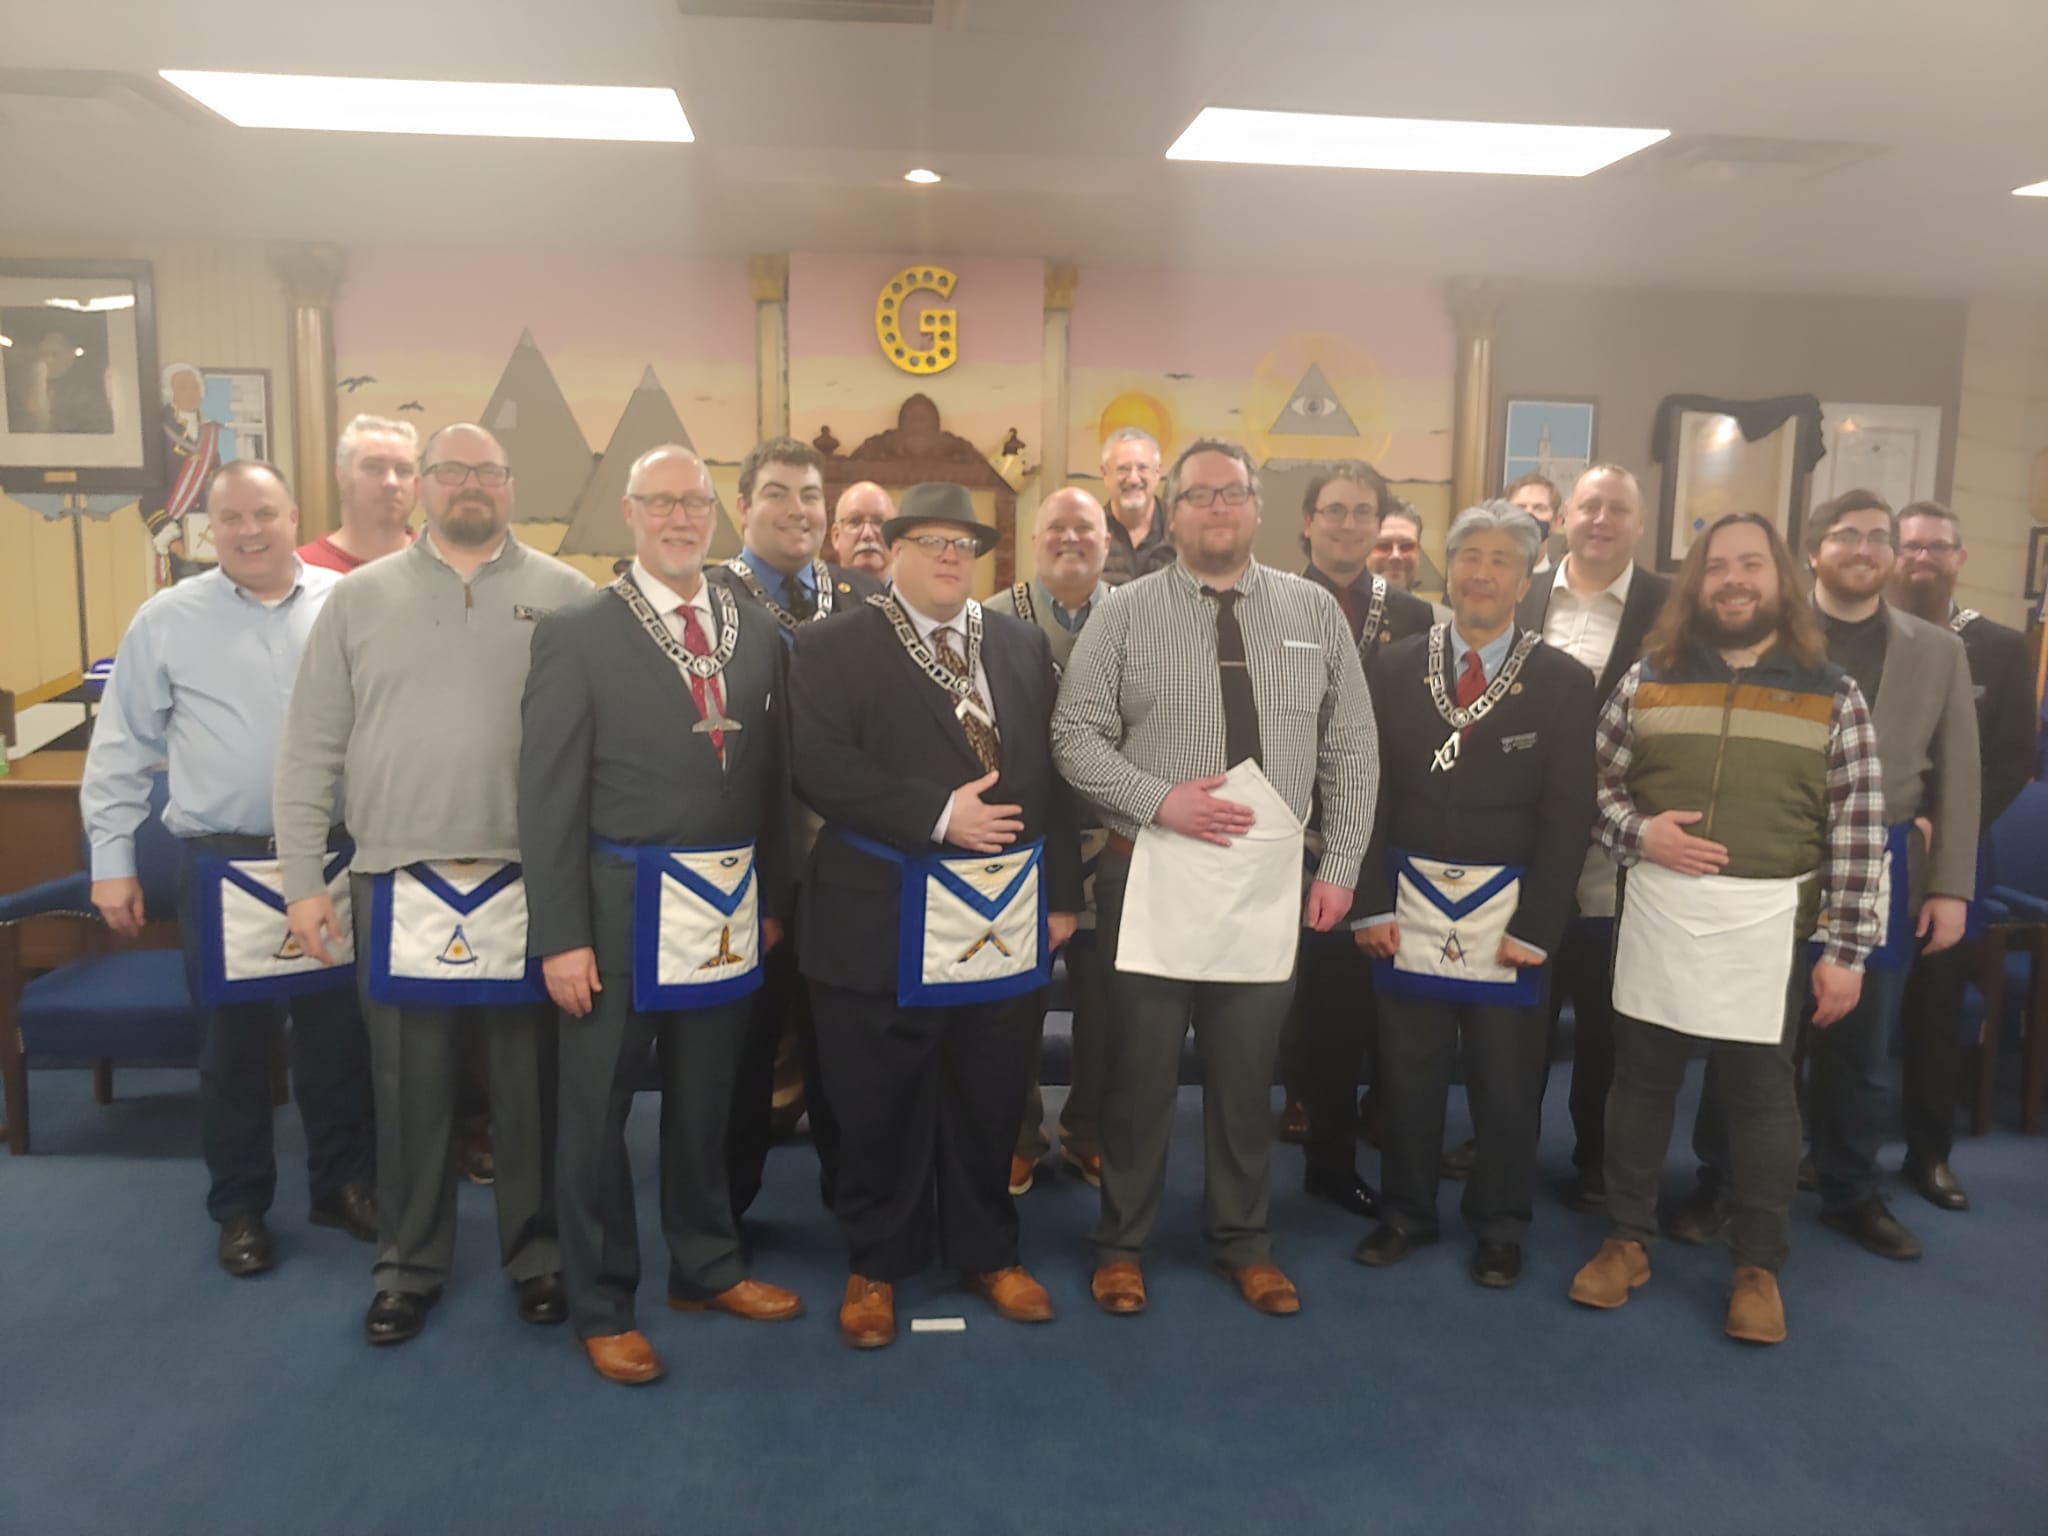 Photo of newest Entered Apprentice and lodge members